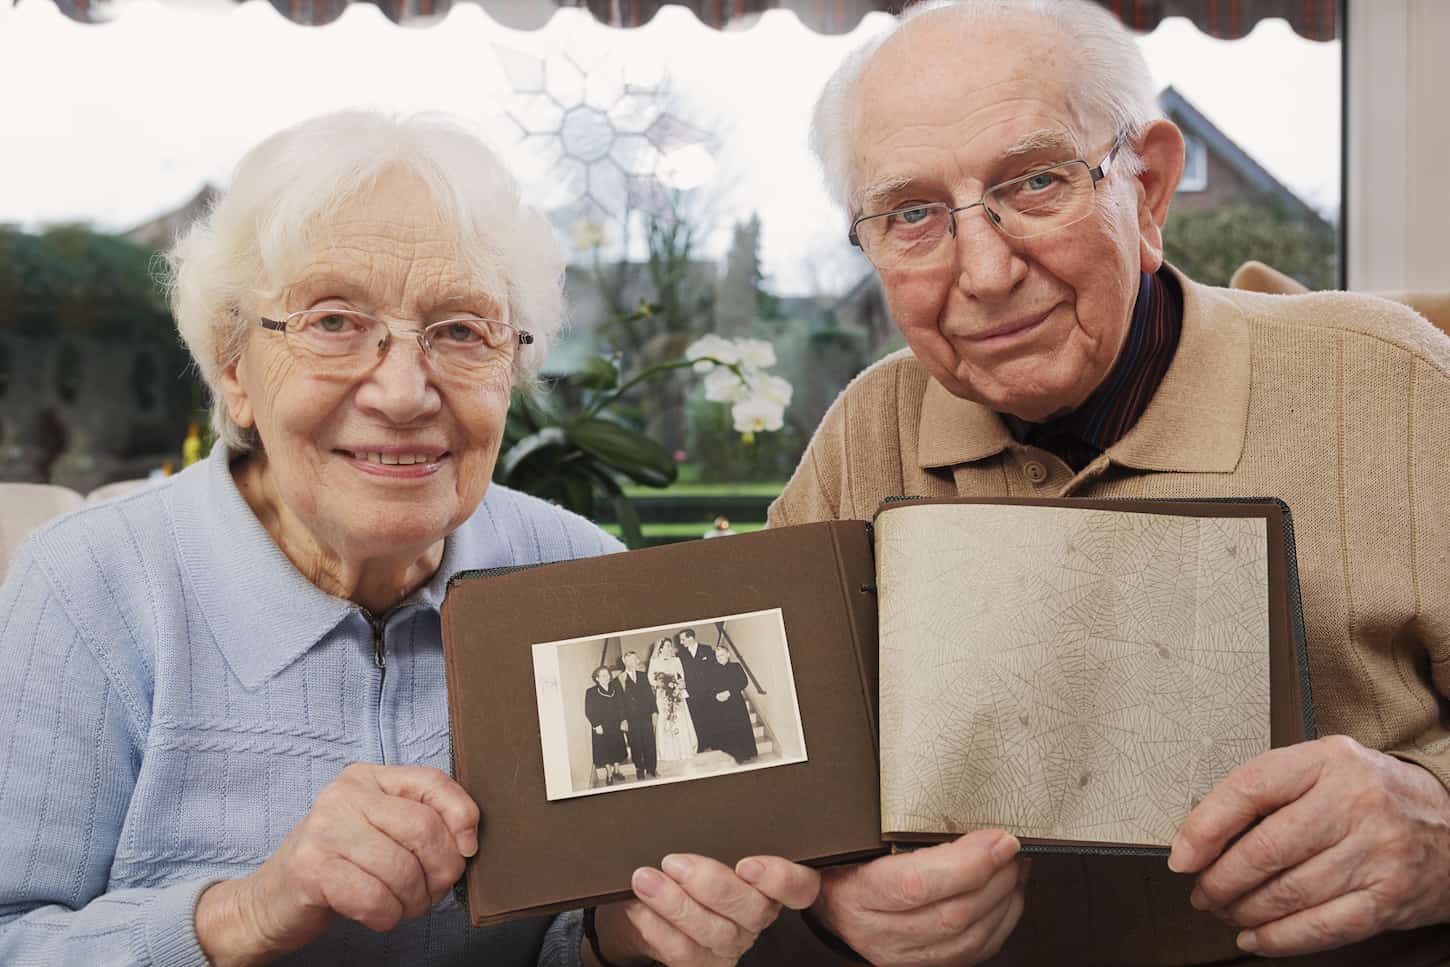 An image of a Senior couple showing an old photograph of the wedding day.